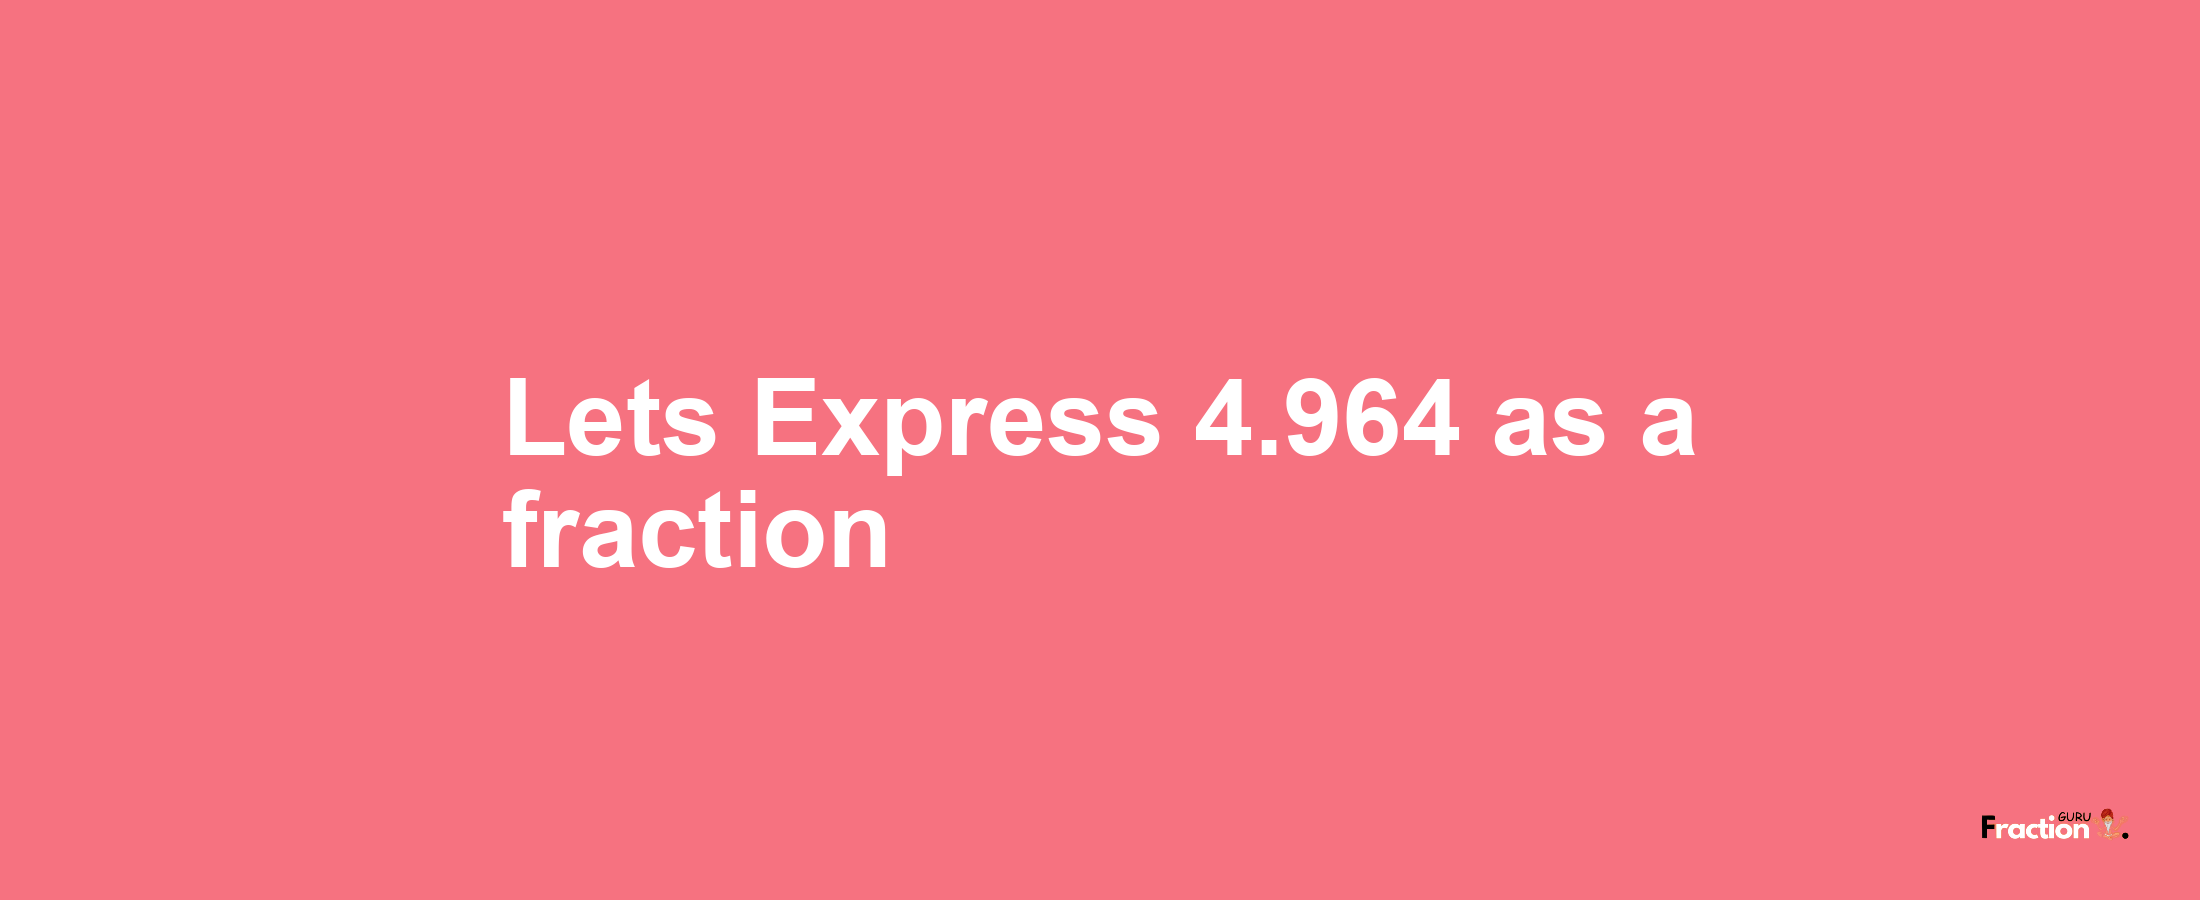 Lets Express 4.964 as afraction